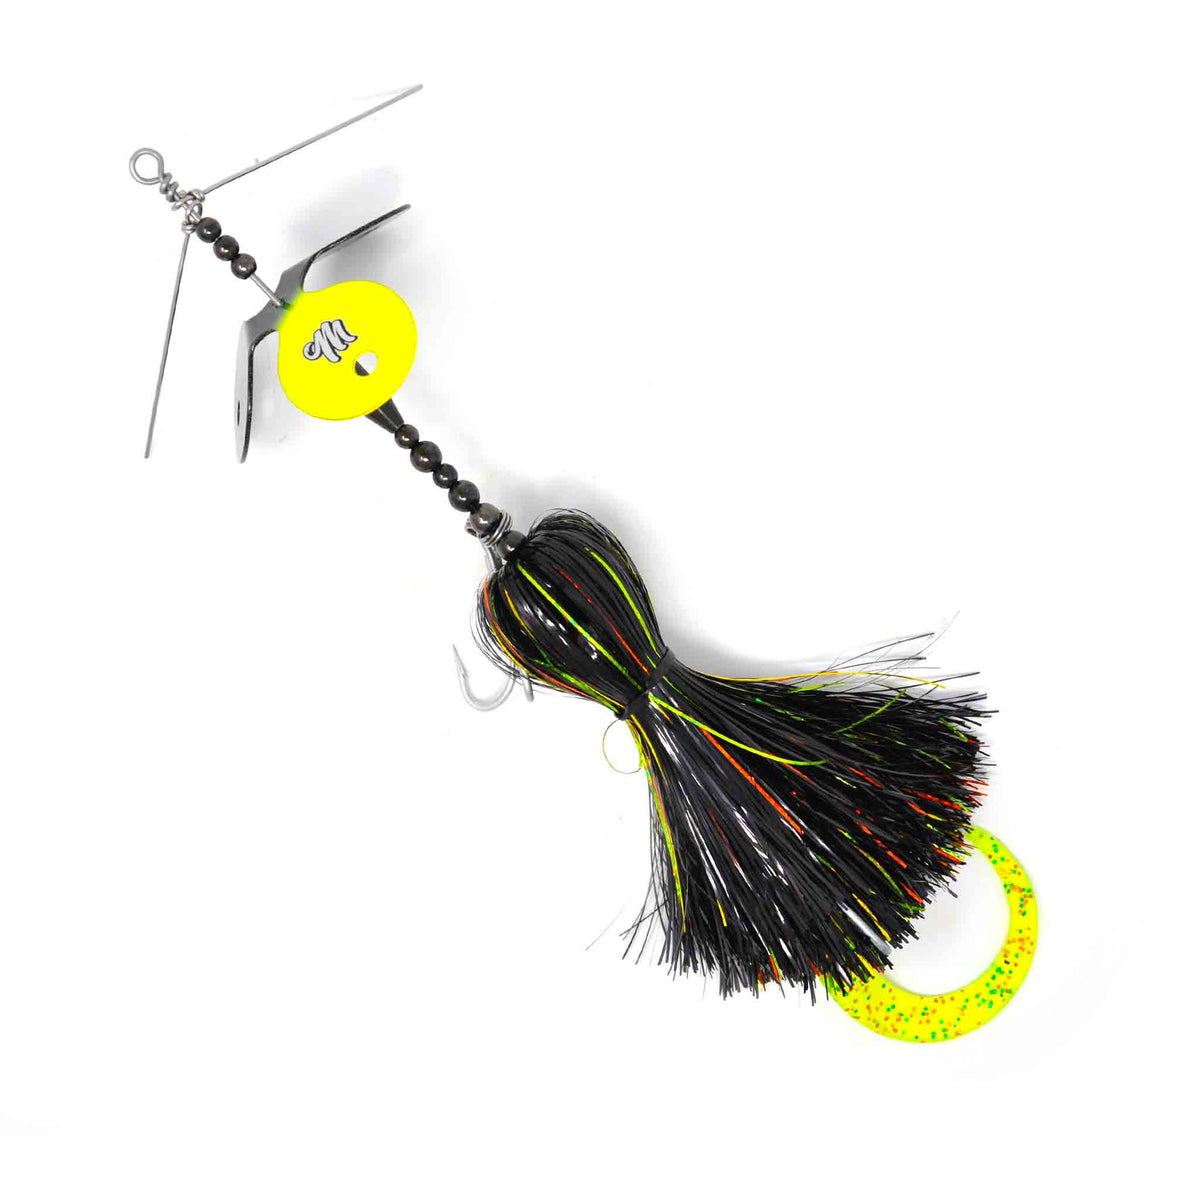 View of Bucktails Muskie Munchies Standard Ticker Killer Triple Slurp Bucktail Lemon Sour available at EZOKO Pike and Musky Shop